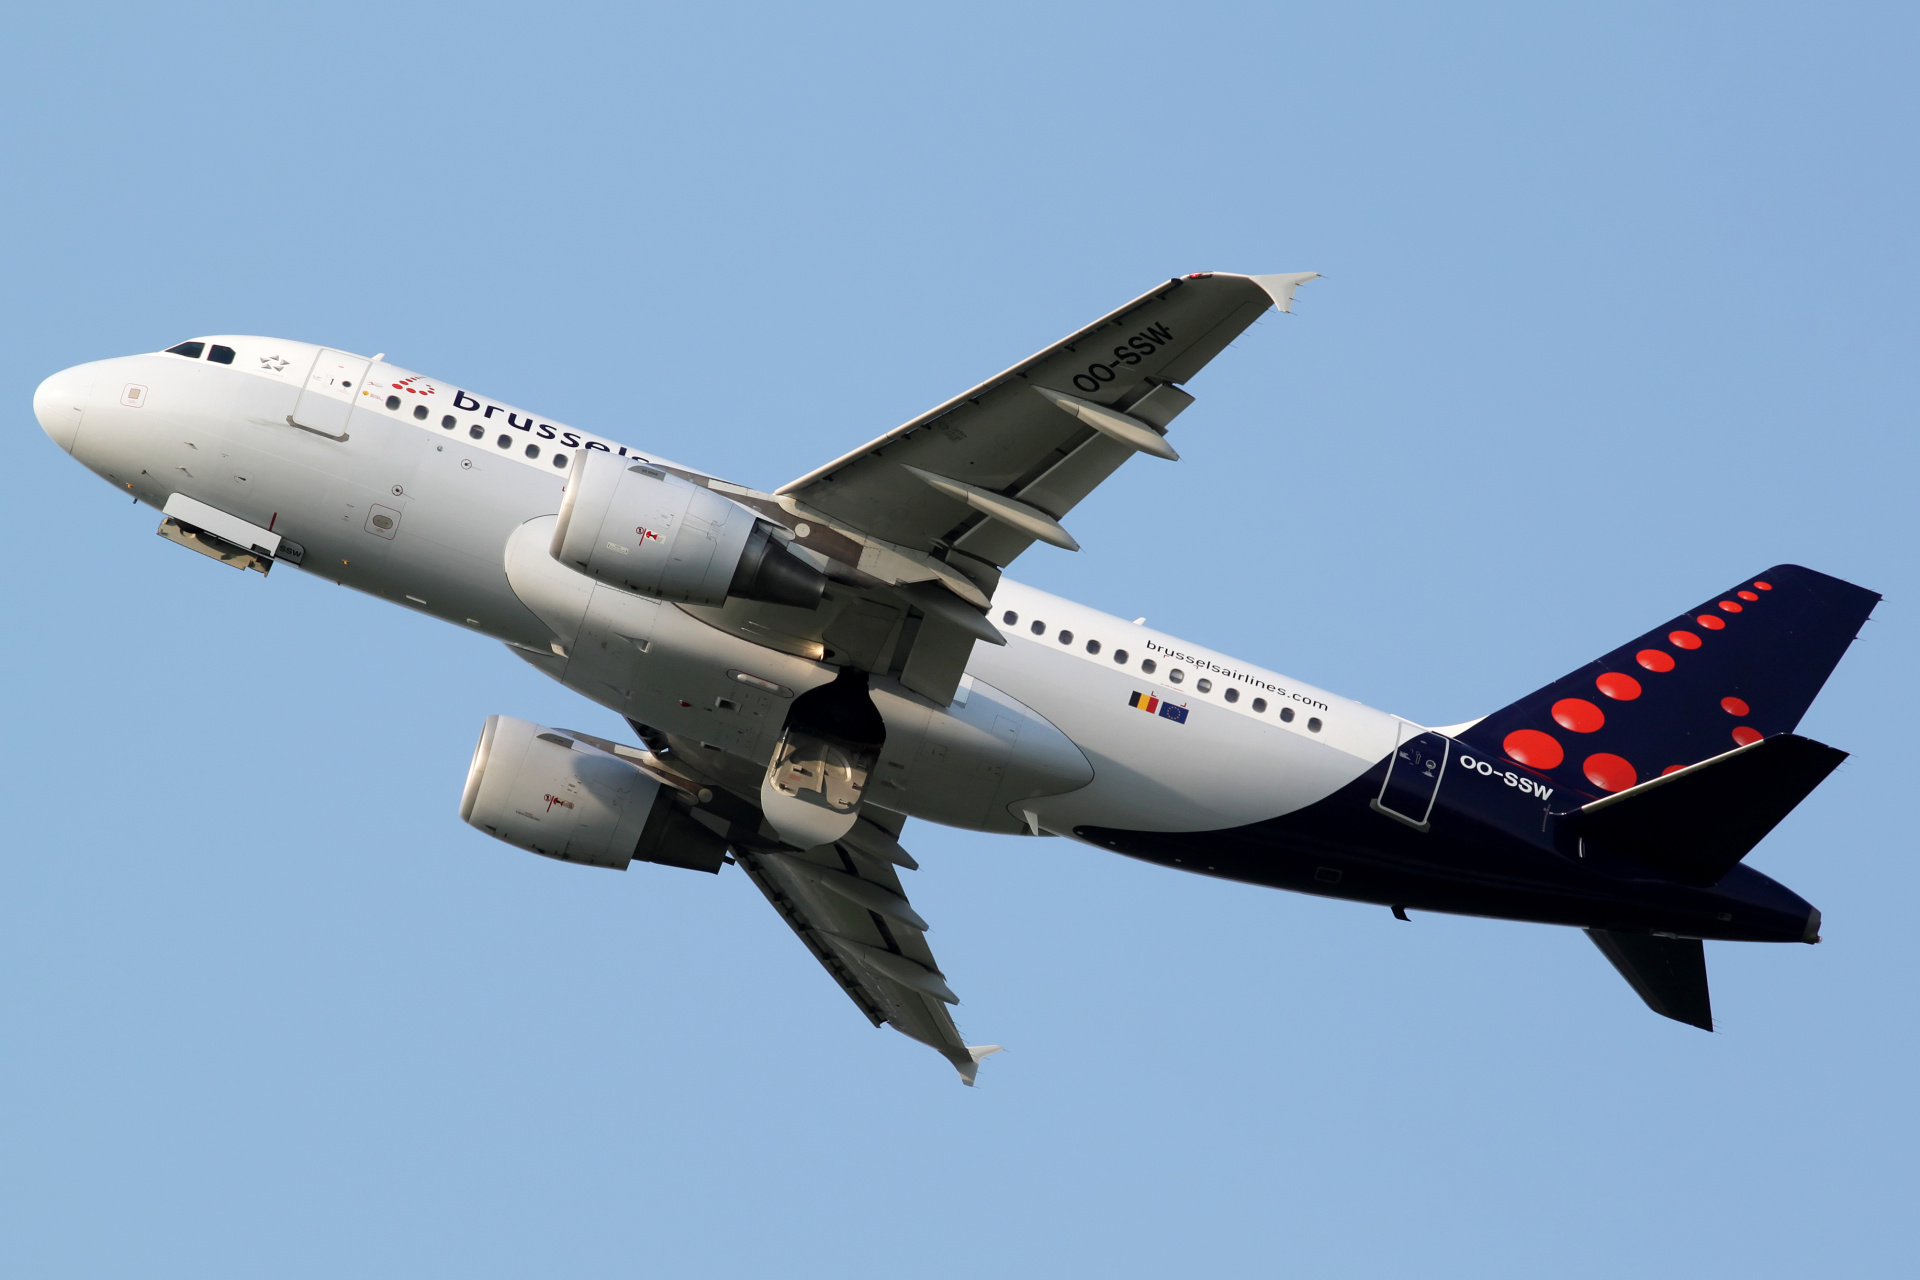 OO-SSW (Samoloty » Spotting na EPWA » Airbus A319-100 » Brussels Airlines)